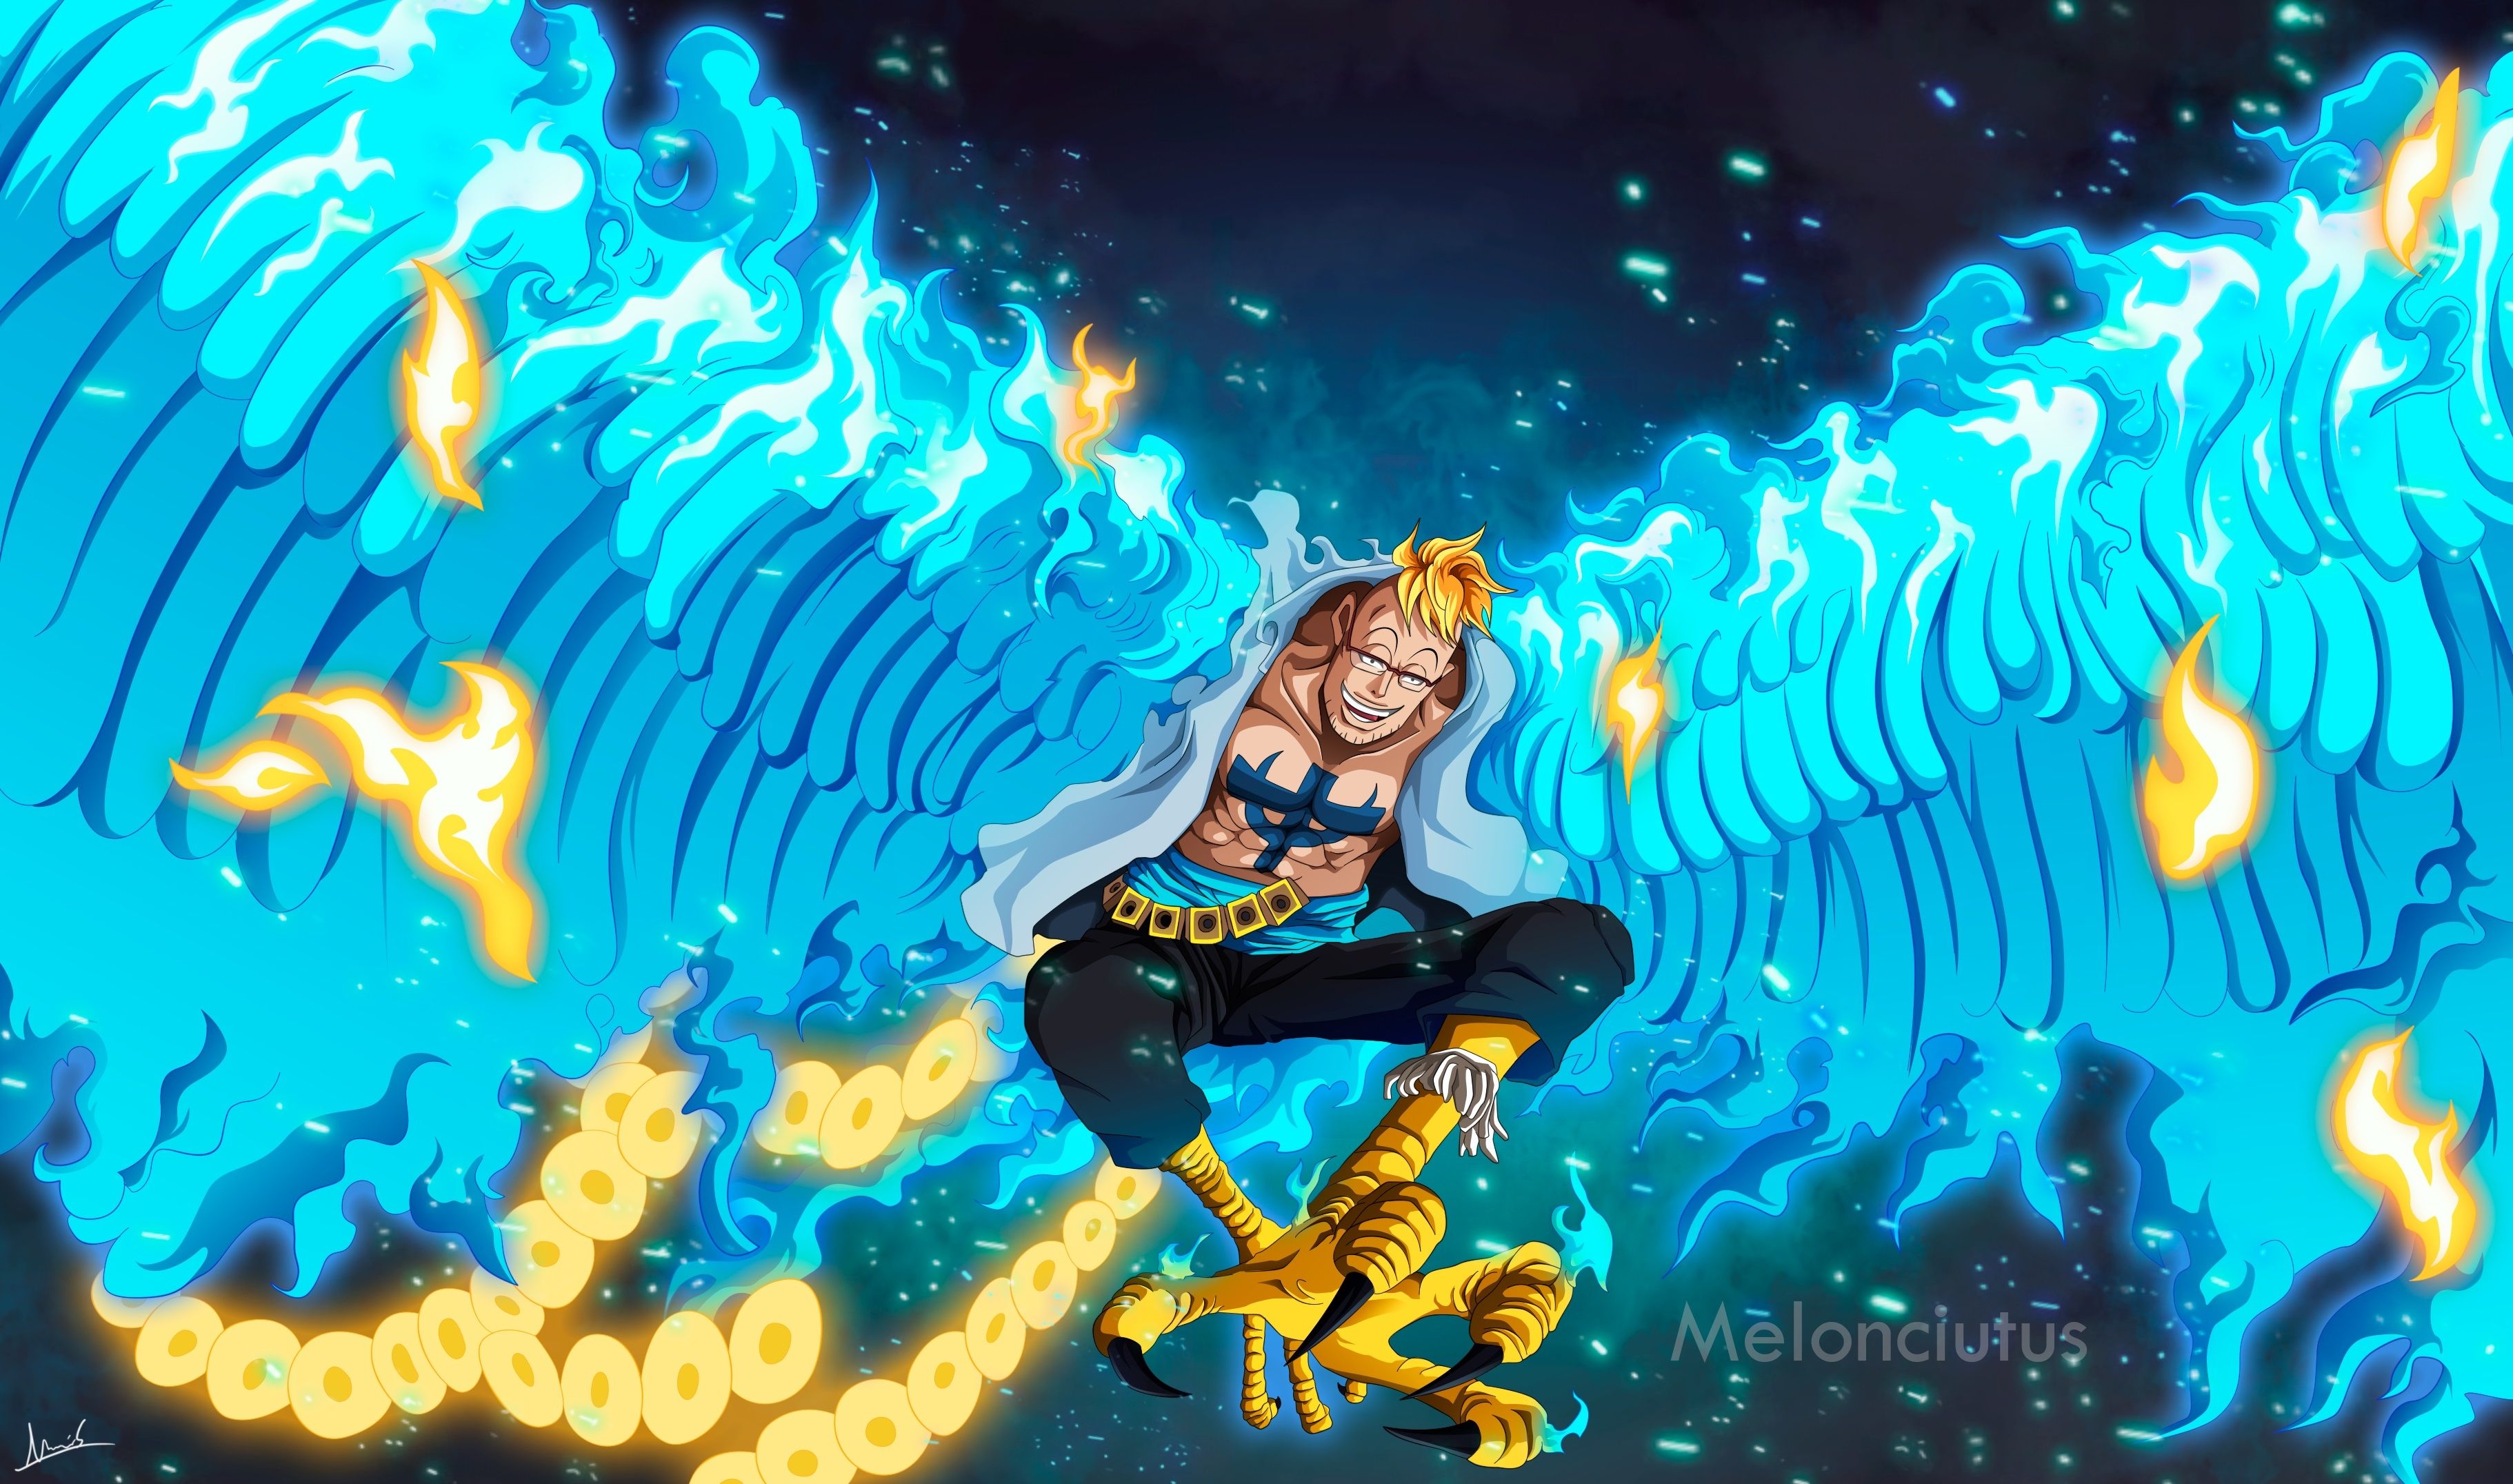 Marco One Piece Art 4K Wallpaper, HD Anime 4K Wallpaper, Image, Photo and Background